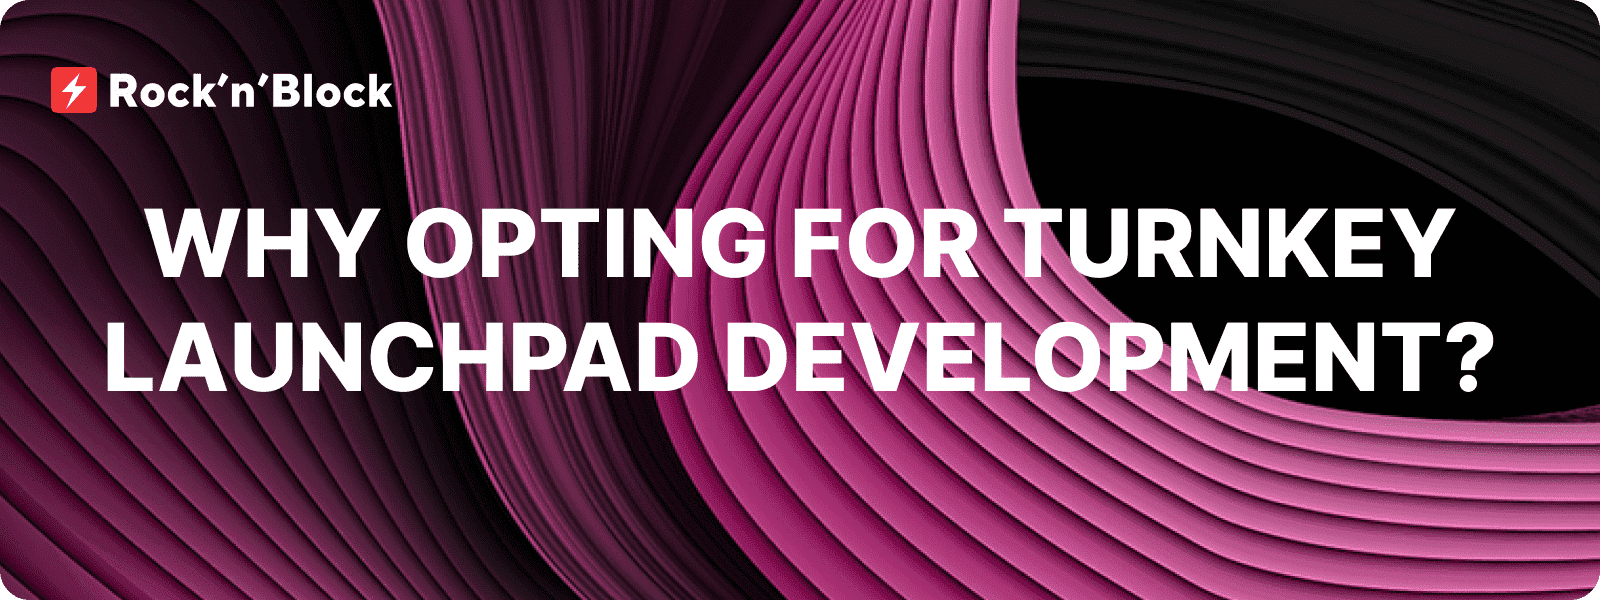 Why Opting for Turnkey Launchpad Development